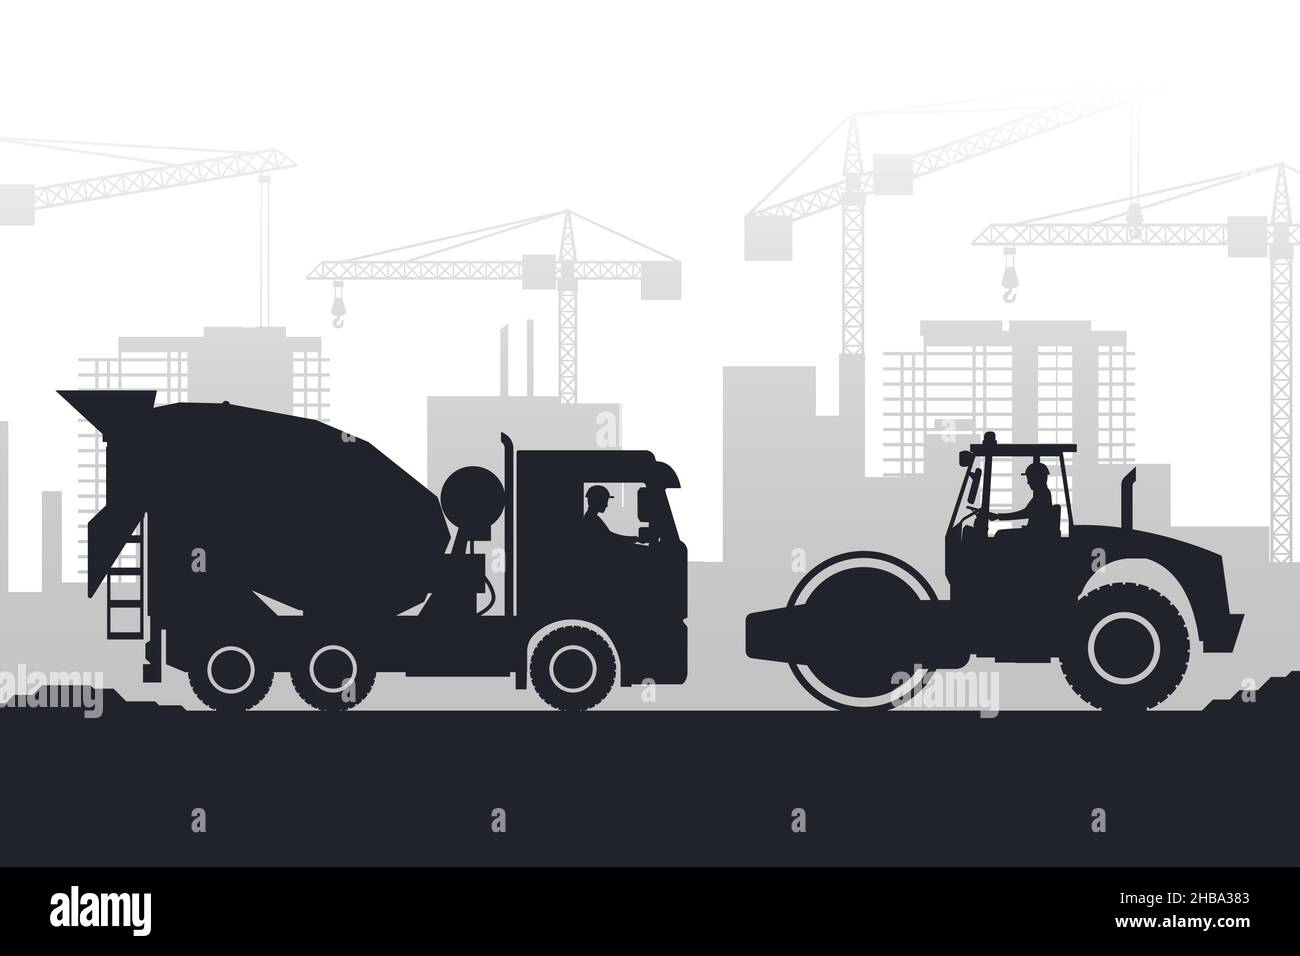 heavy machinery silhouette background with concrete mixer truck and soil compactor in a city under construction Stock Vector